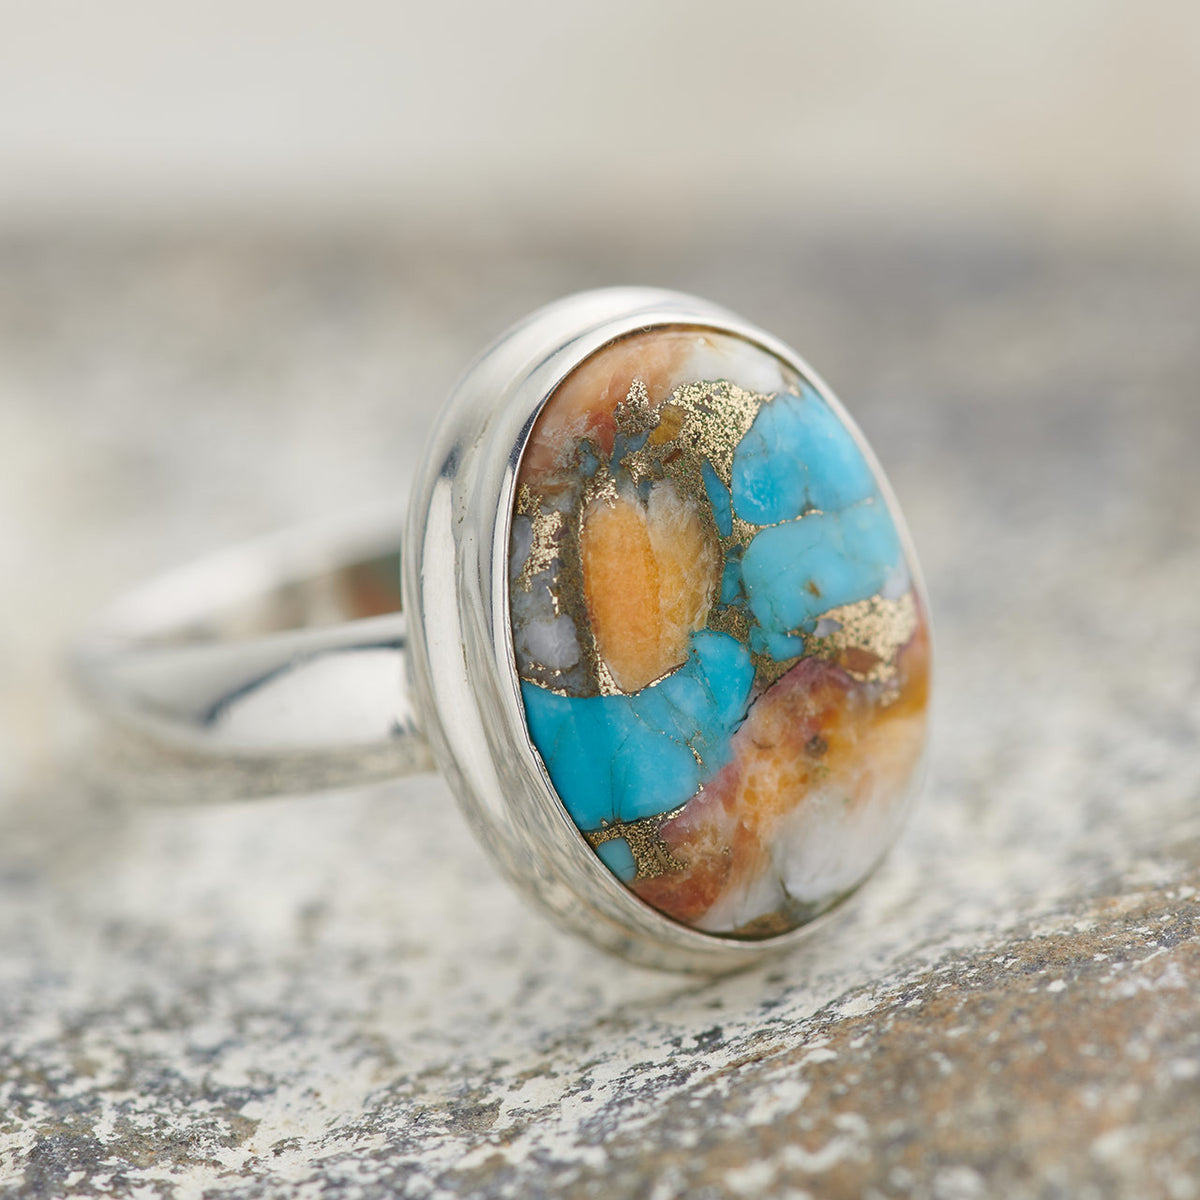 Spiny Turquoise promotes understanding, intuition, creativity, compassion, adaptability, security, joyfulness, serenity, insight, comfort, peace of mind, and protection. Dispels impatience, confusion, depression, and hopelessness.